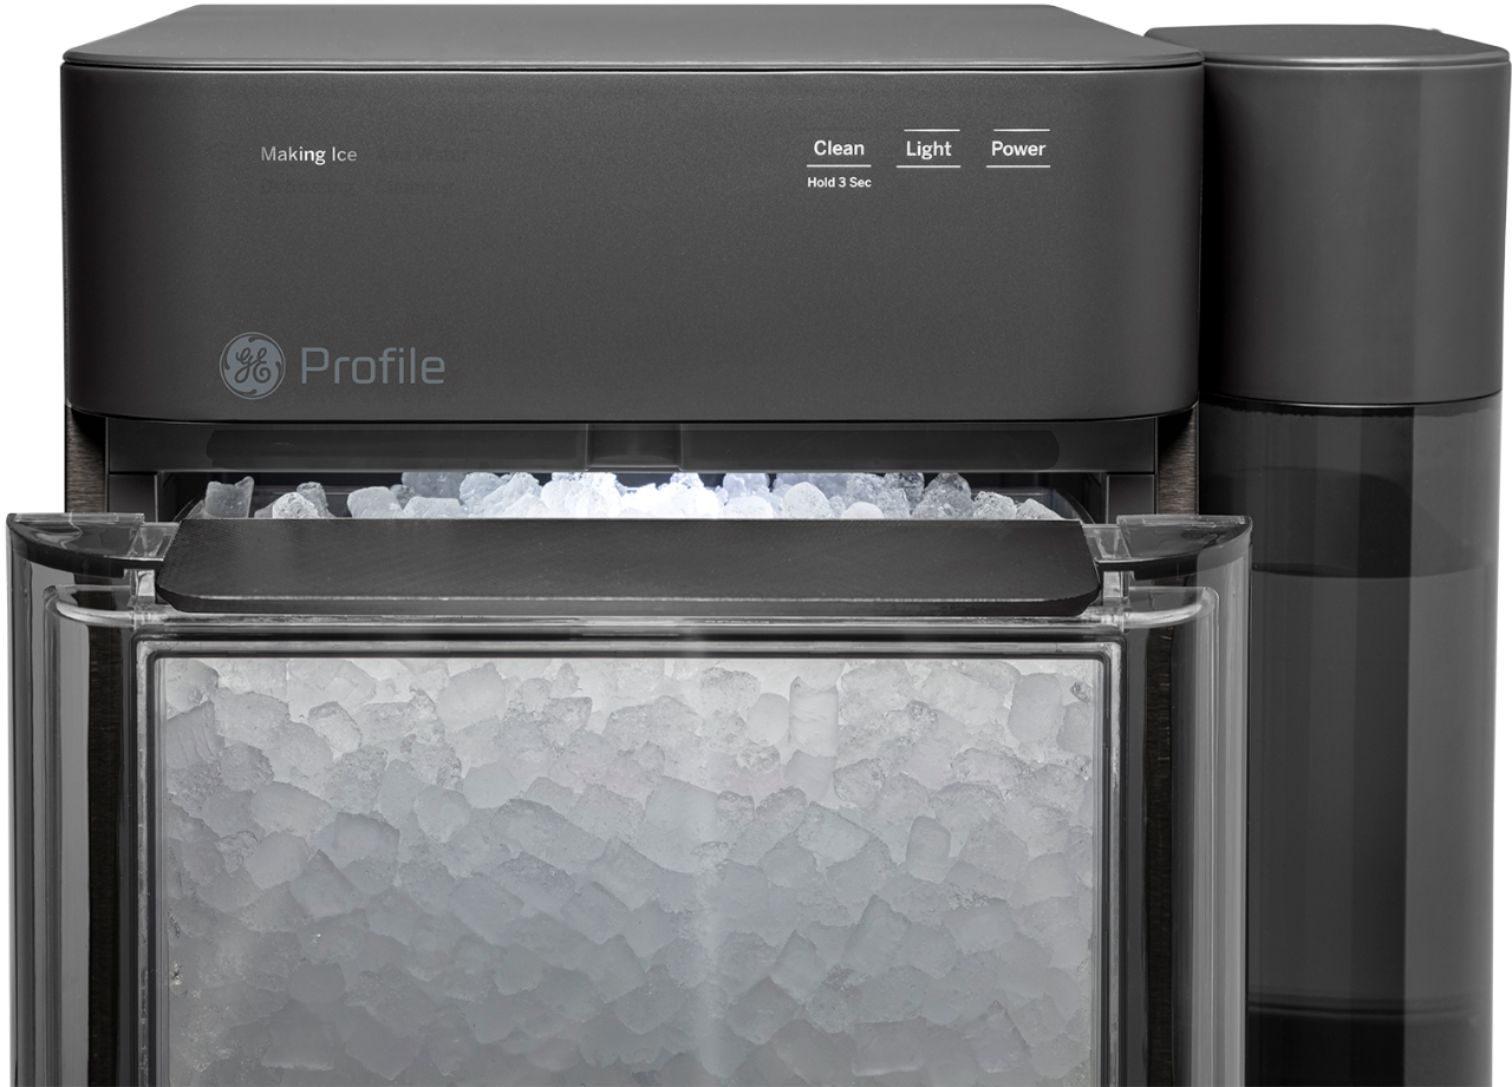 GE Profile Opal 2.0 38-lb. Portable Ice maker with Nugget Ice Production,  Side Tank, and Built-in WiFi Black Stainless Steel XPIO13BCBT - Best Buy